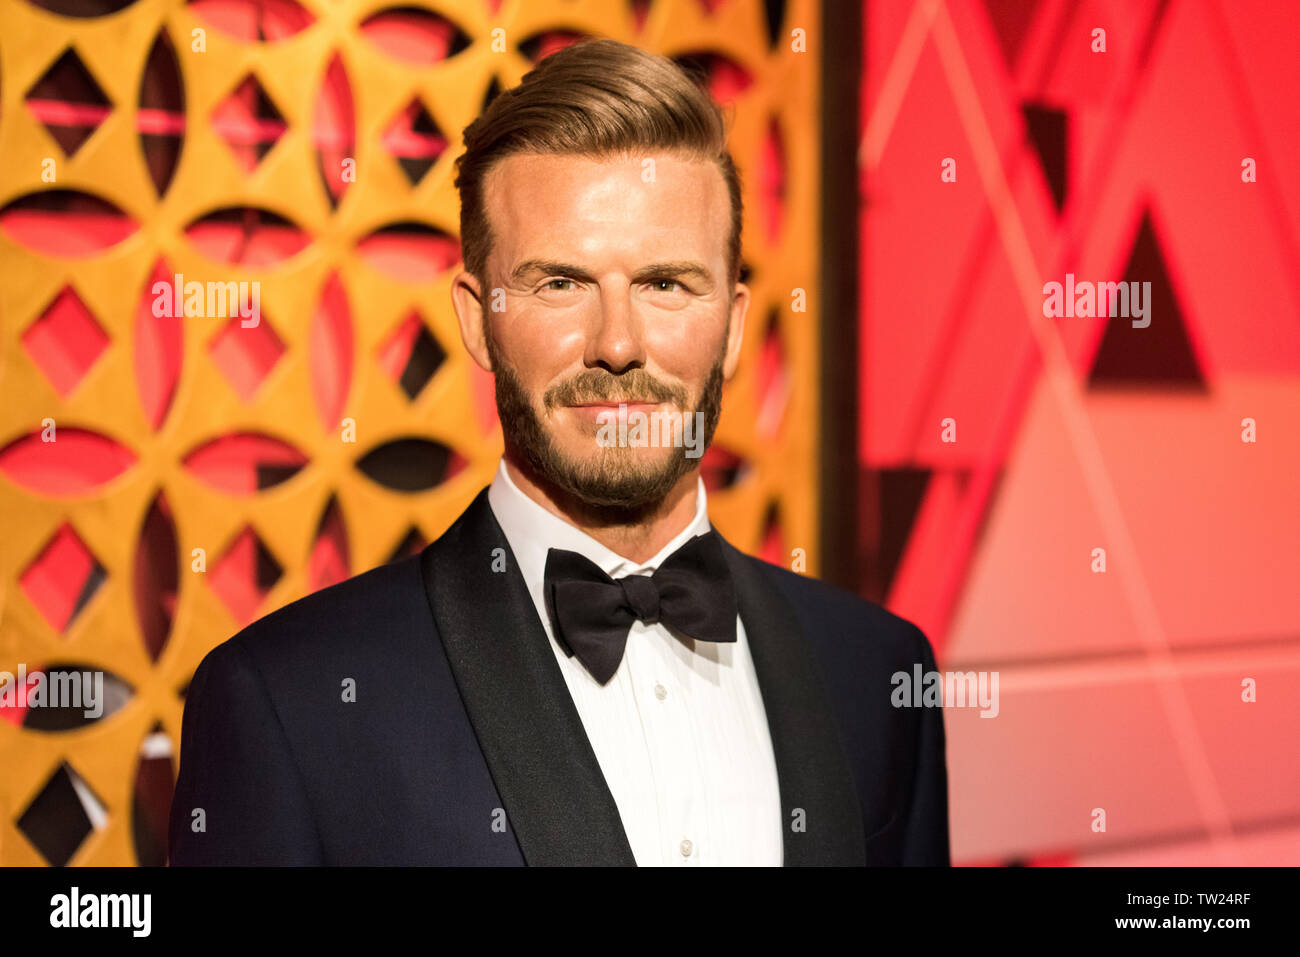 ISTANBUL, TURKEY - MARCH 16, 2017: David Beckham wax figure at Madame Tussauds  museum in Istanbul. Stock Photo